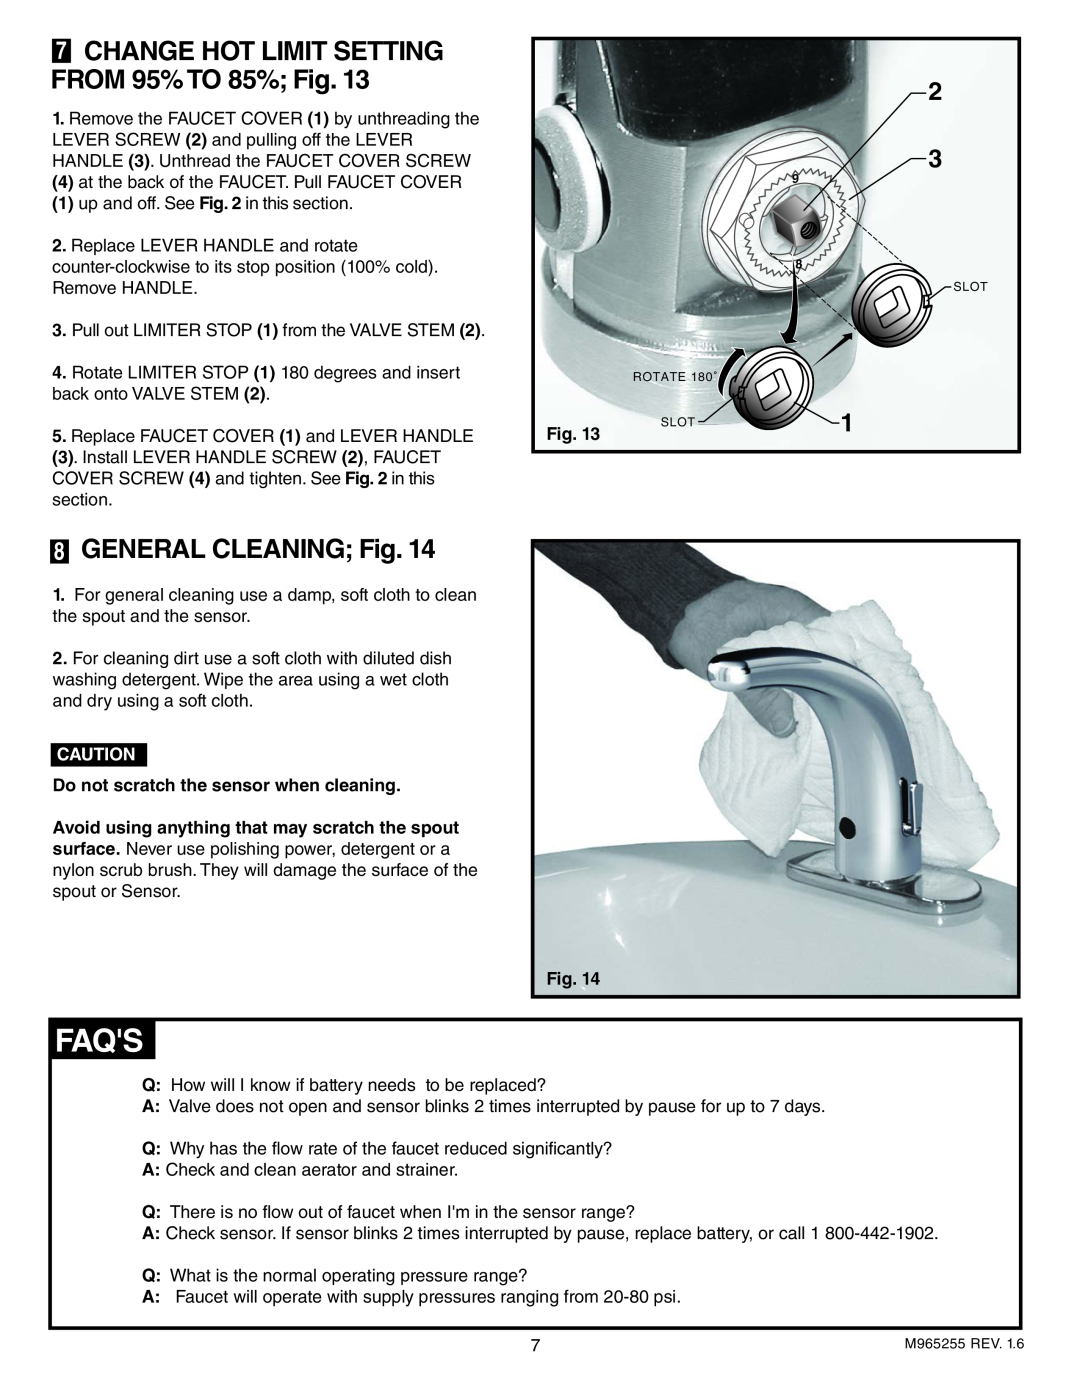 American Standard 7055.105, 705.205, 7055.115 Faqs, GENERAL CLEANING Fig, CHANGE HOT LIMIT SETTING FROM 95% TO 85% Fig 